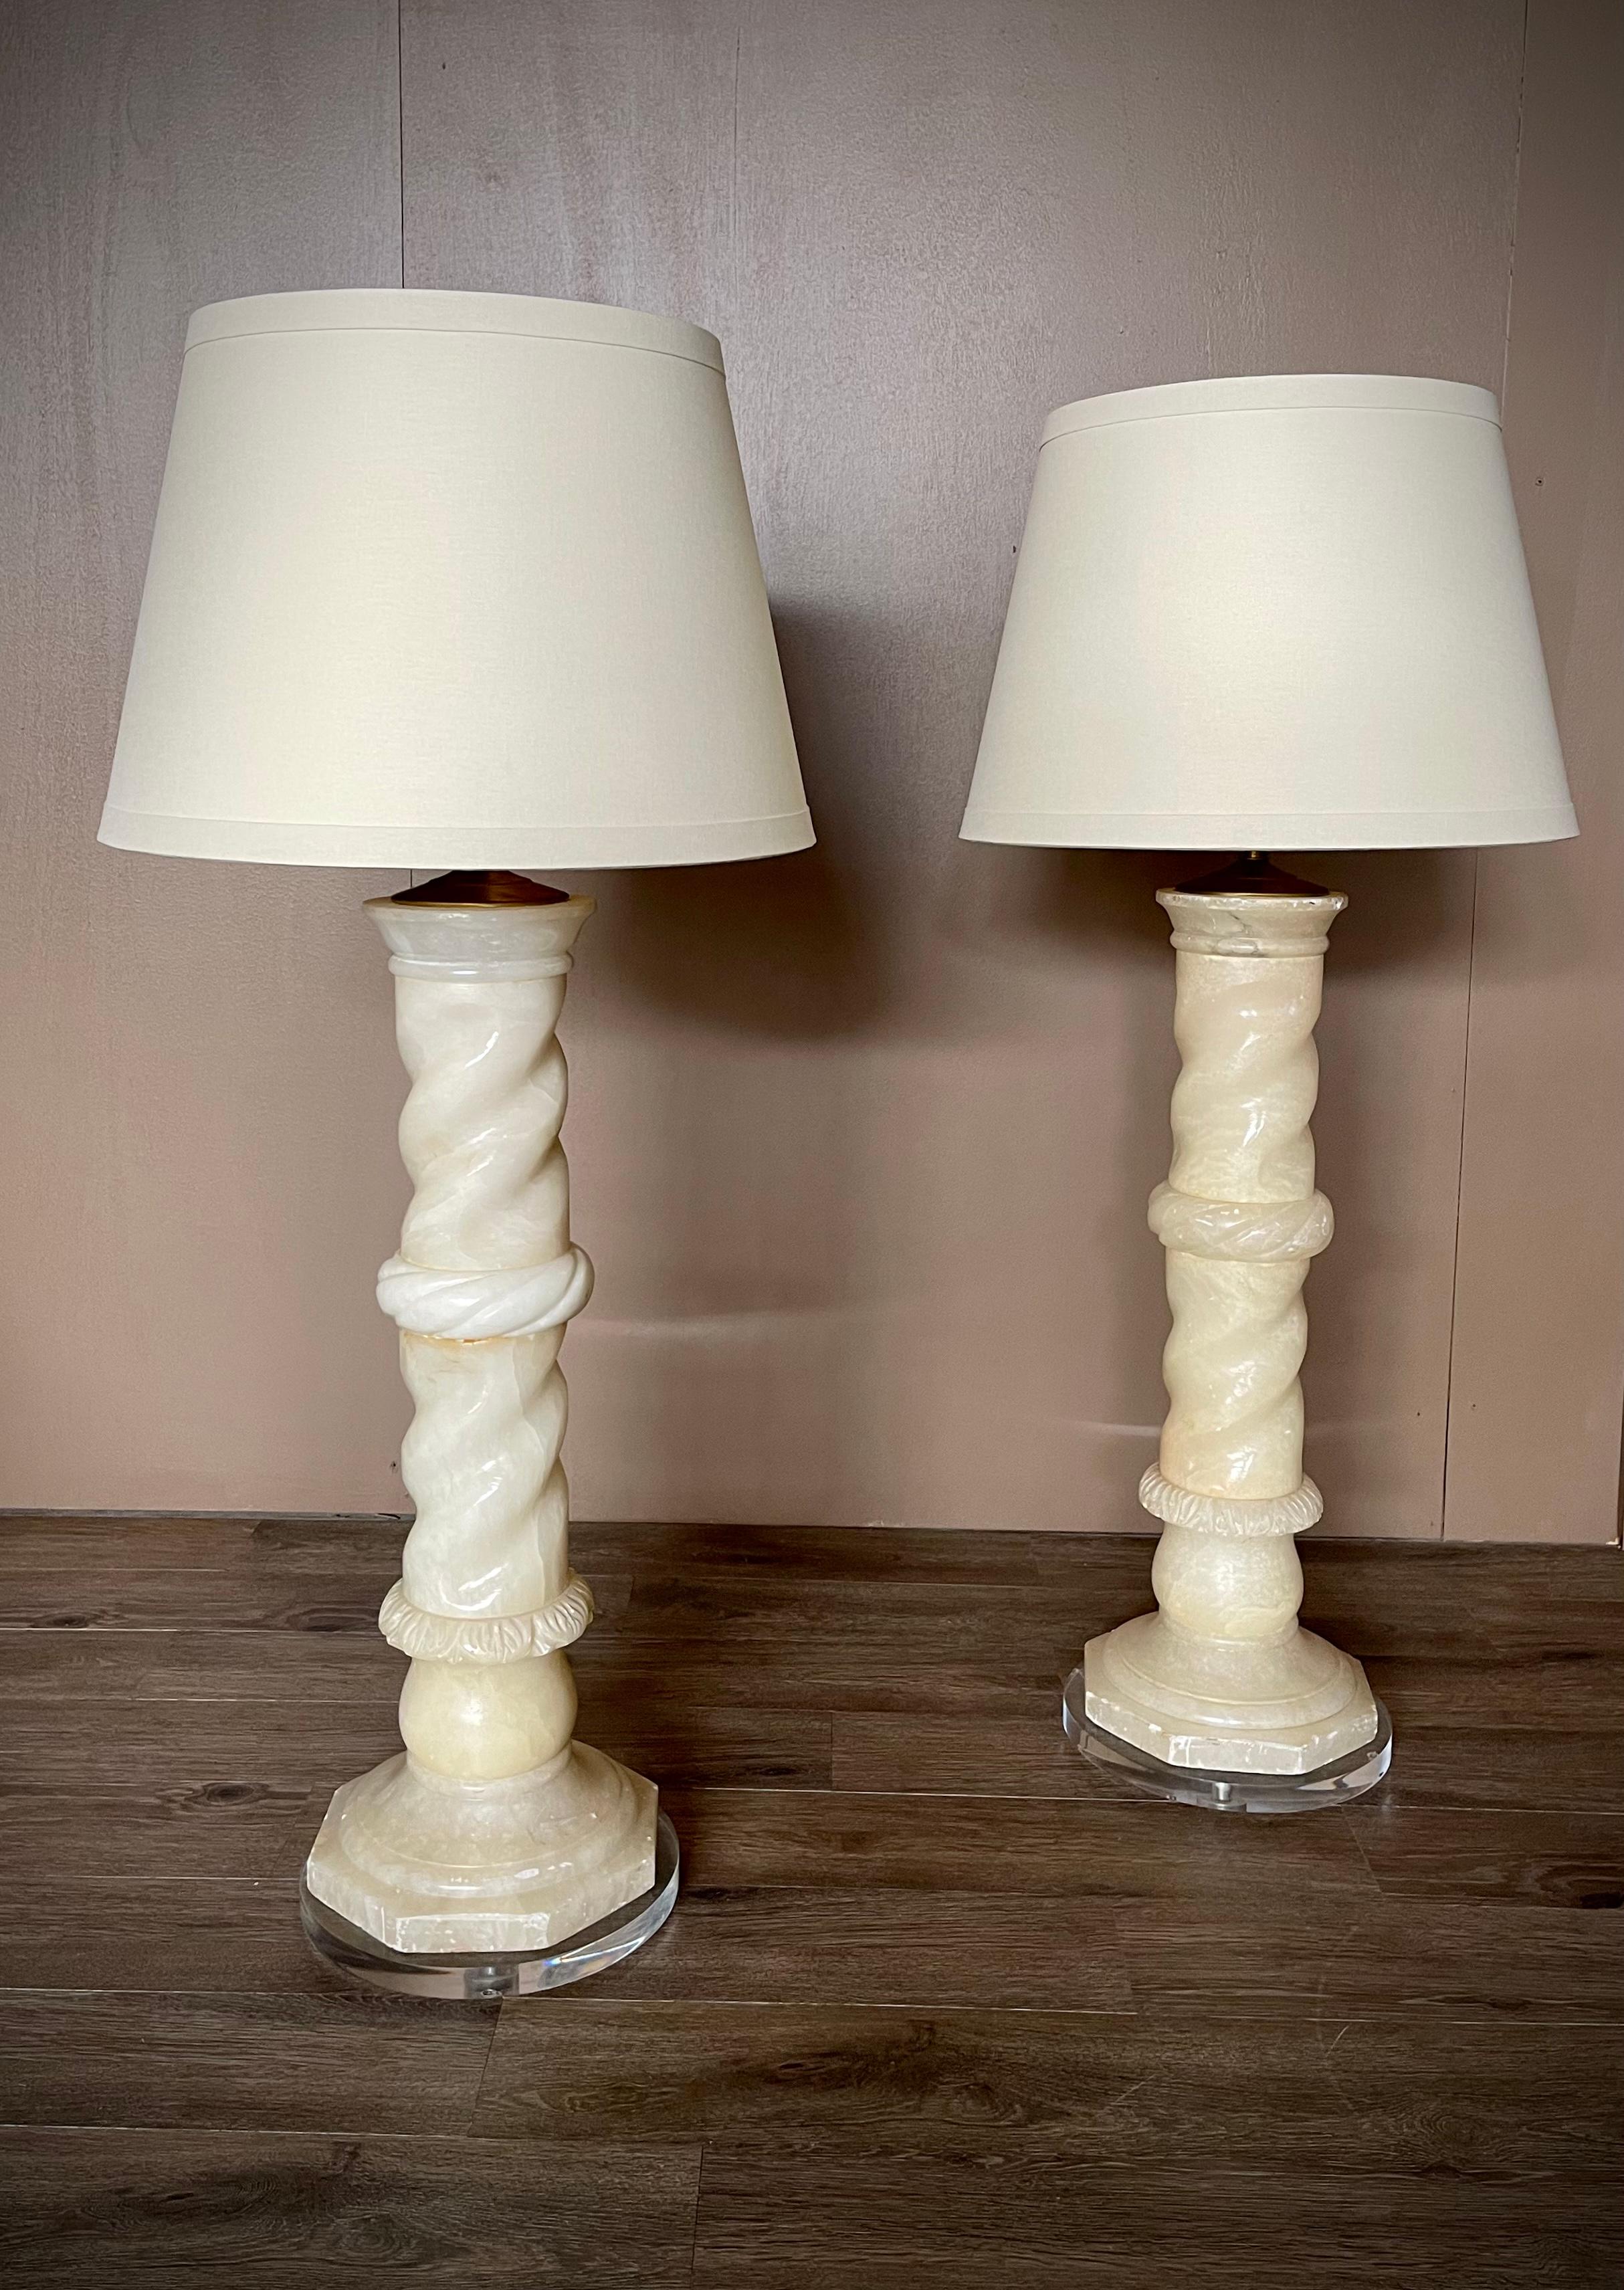 Pair Antique Italian Architectural Alabaster Lamps, Lucite Bases, Spiral Carved For Sale 1